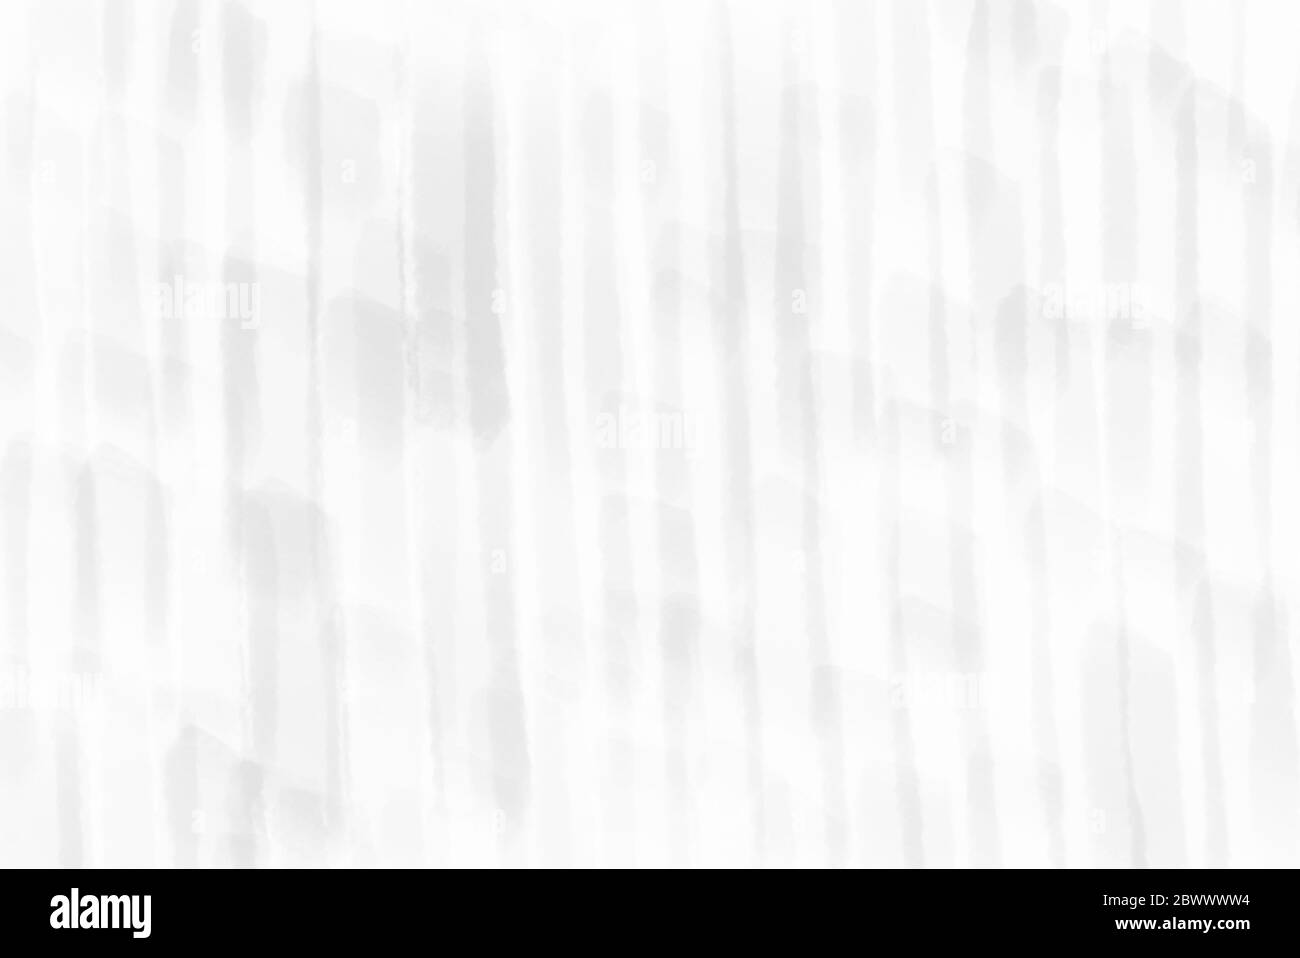 Vertical Line Free Hand Drawing on White Paper Background. Stock Photo